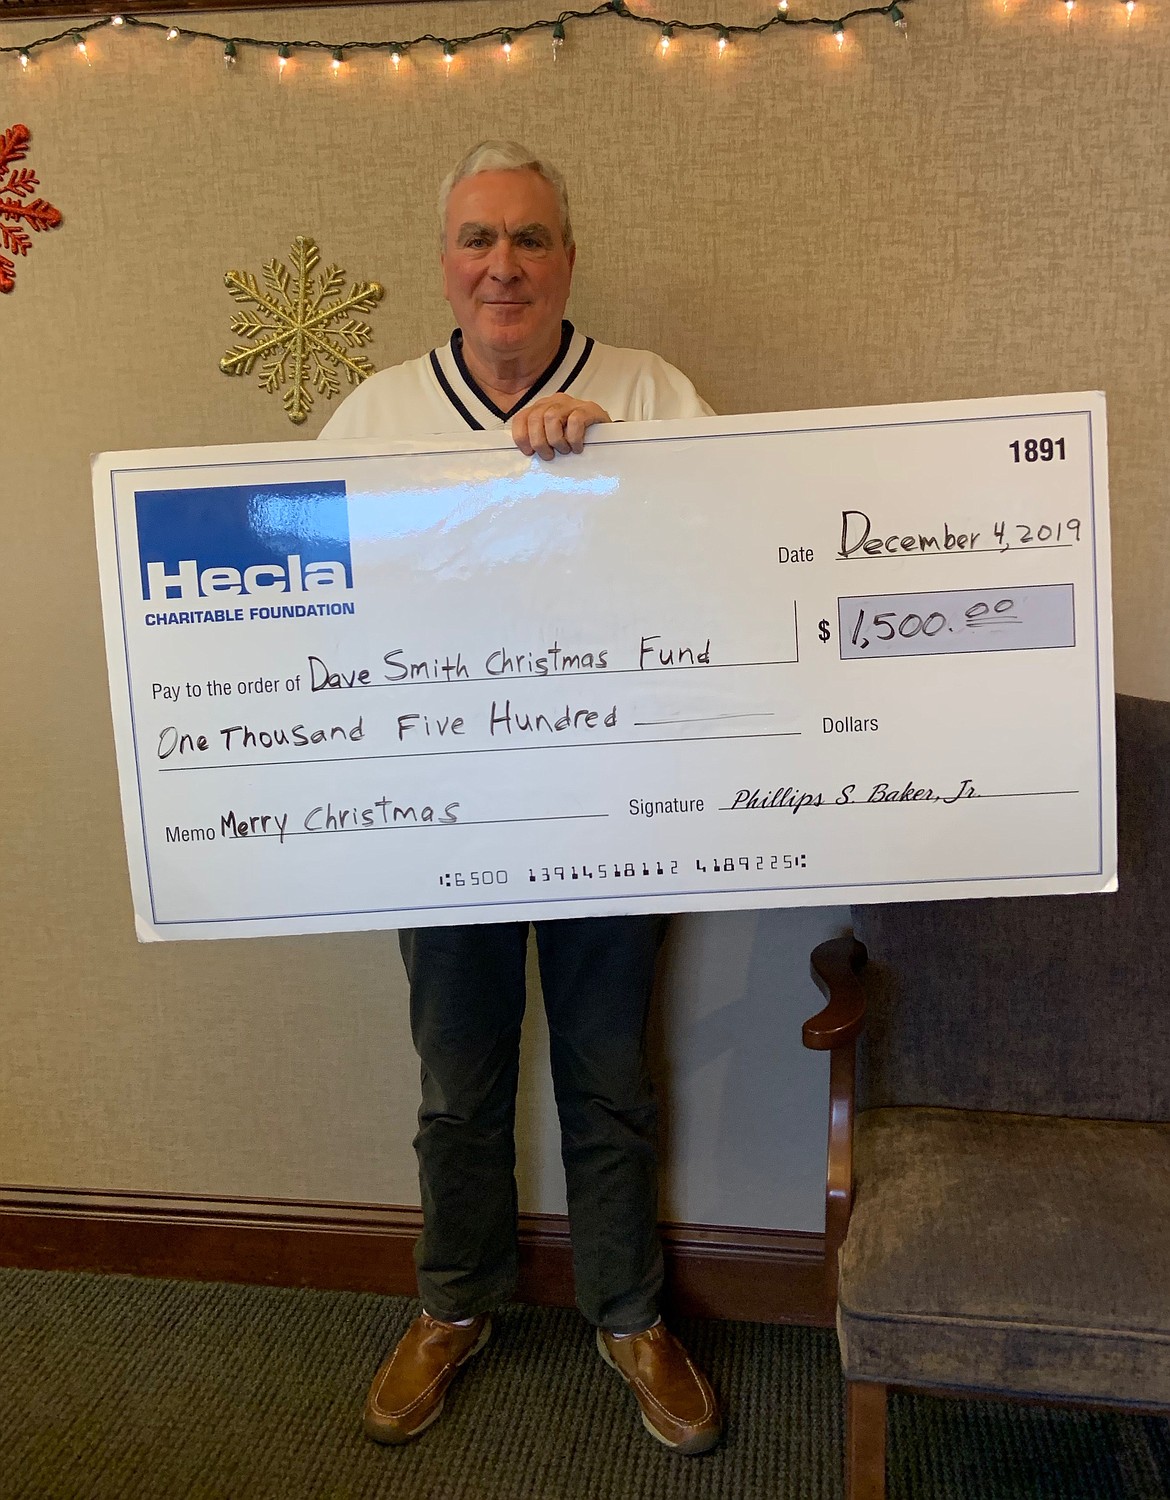 Photo by ARIANA McDONALD
Mike Dexter with the Hecla Charitable Foundation made an appearance with his BIG check.